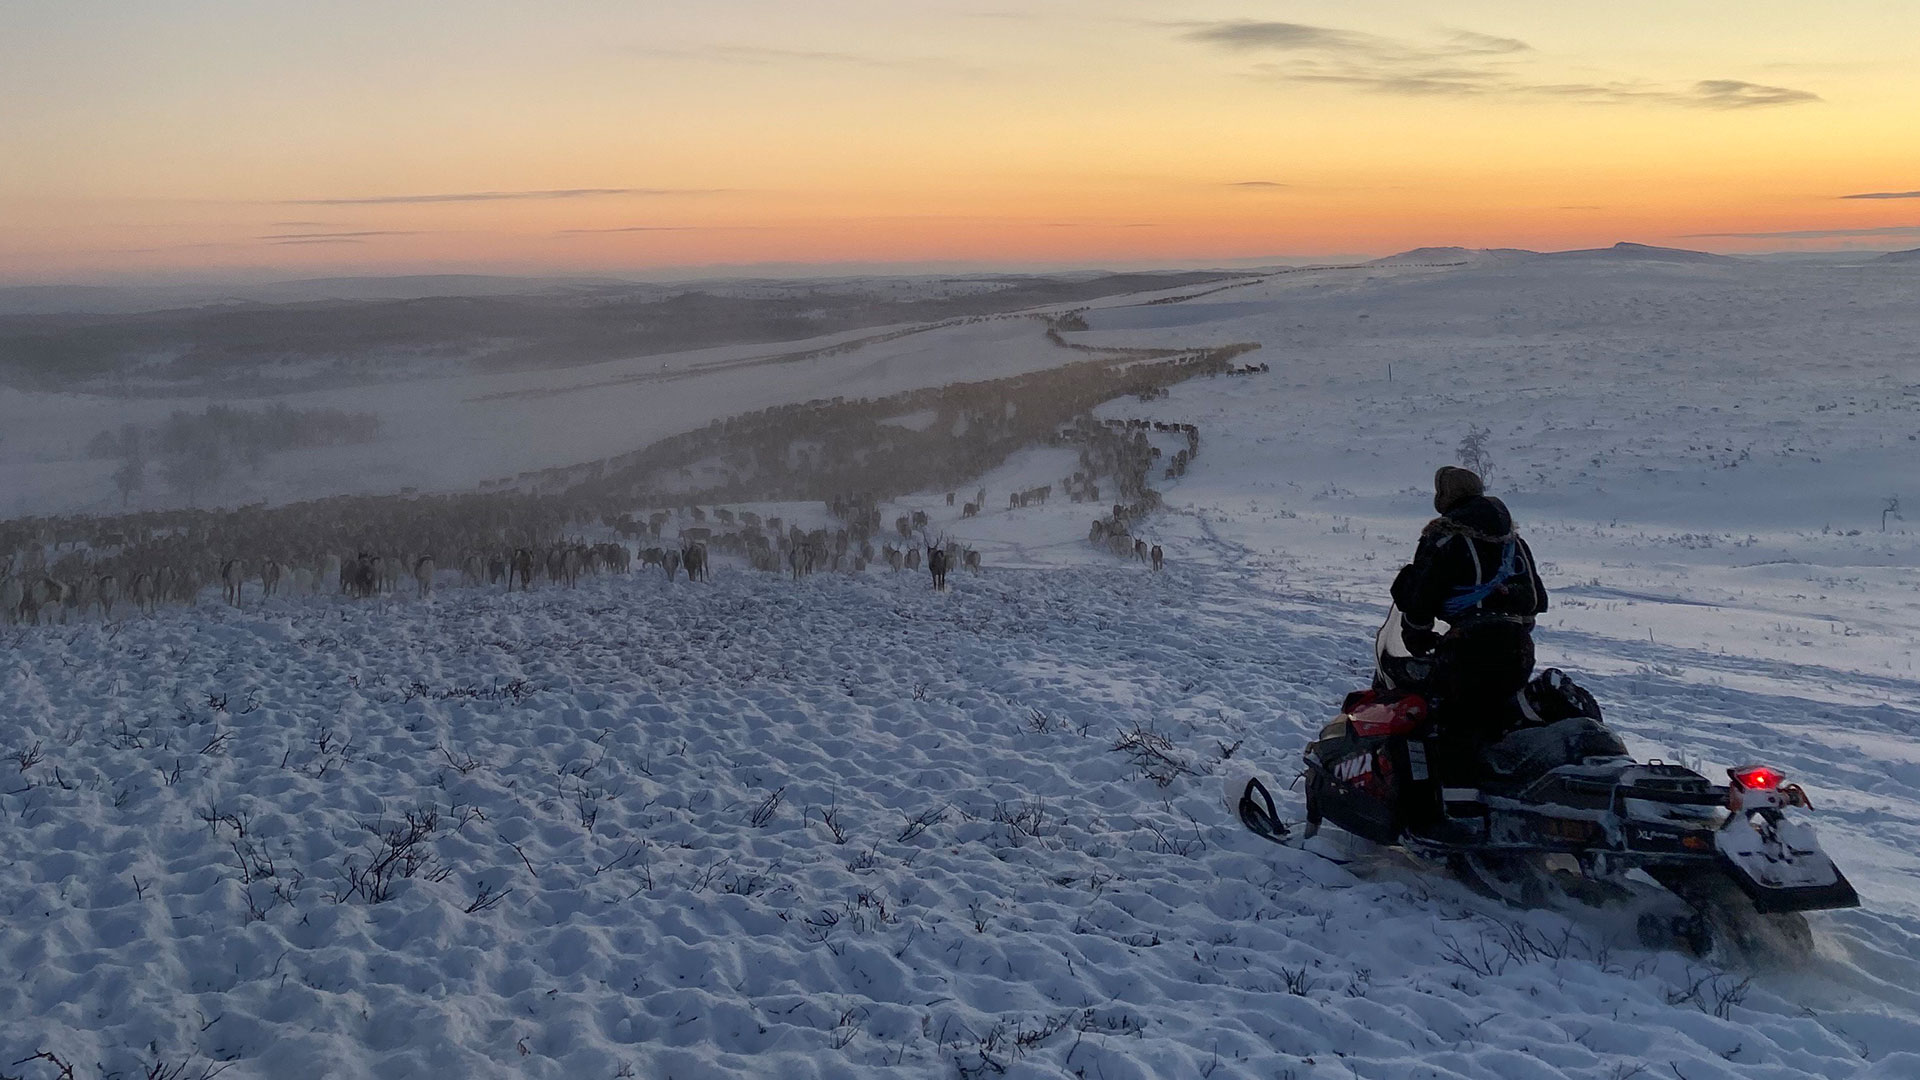 Man on vehicle at the top of hill. The landscape is covered in snow 